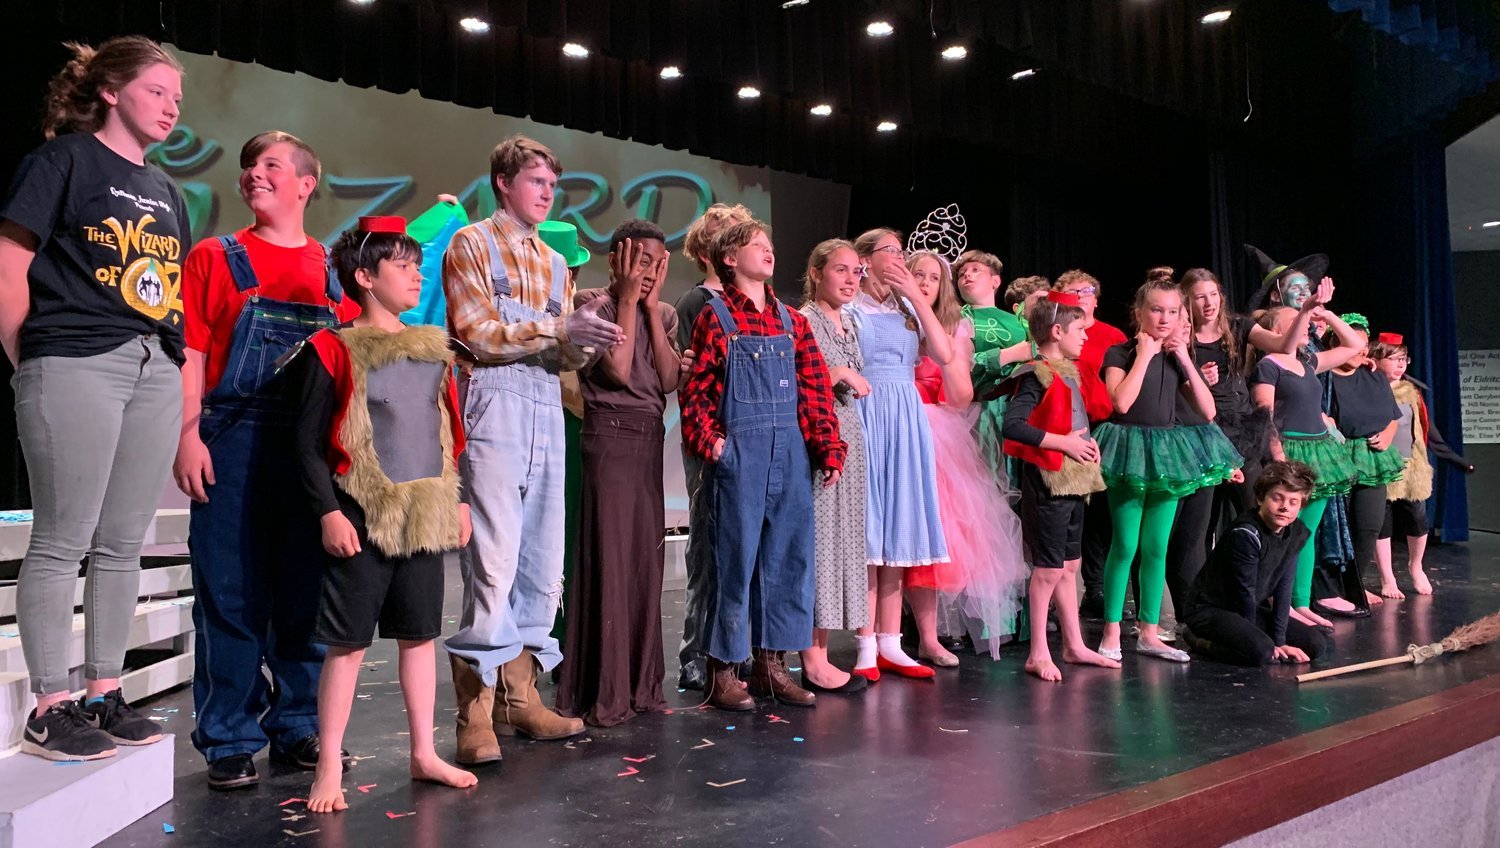 Members of the Quitman Junior High One Act Play cast and crew bow to the audience after their dinner theater performance on May 16. The students presented the play “The Wizard of Oz” to the community.